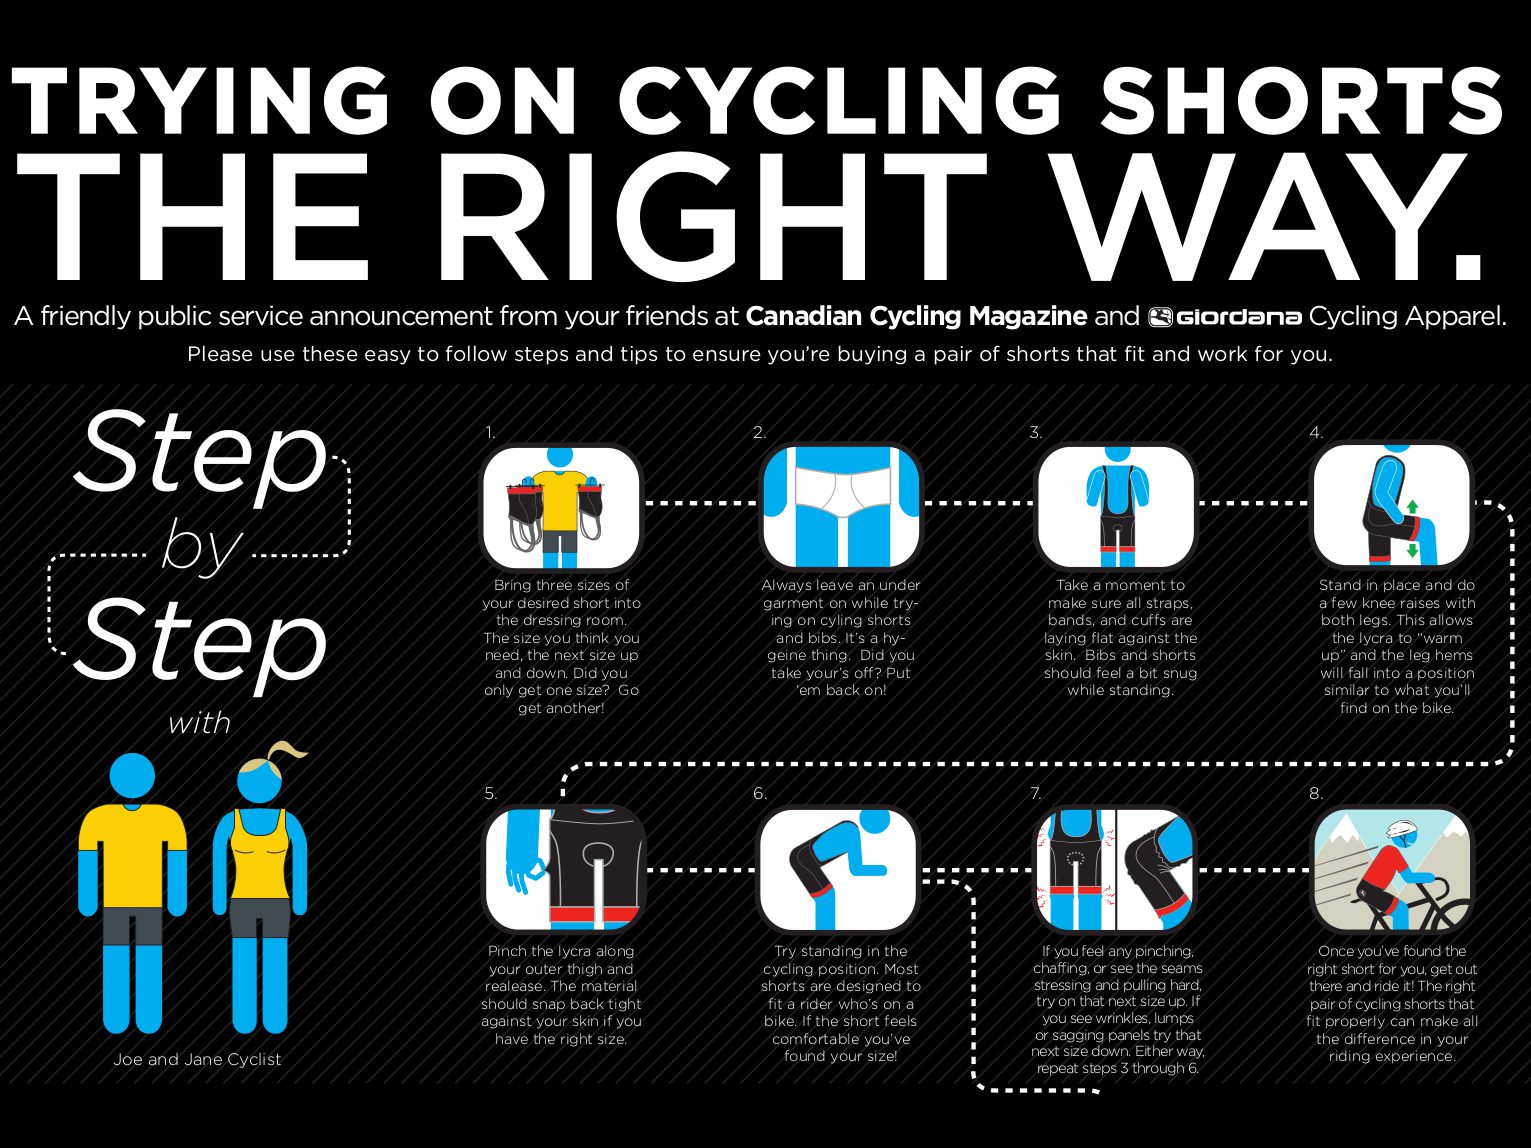 8 Things to Consider When Buying Cycling Shorts